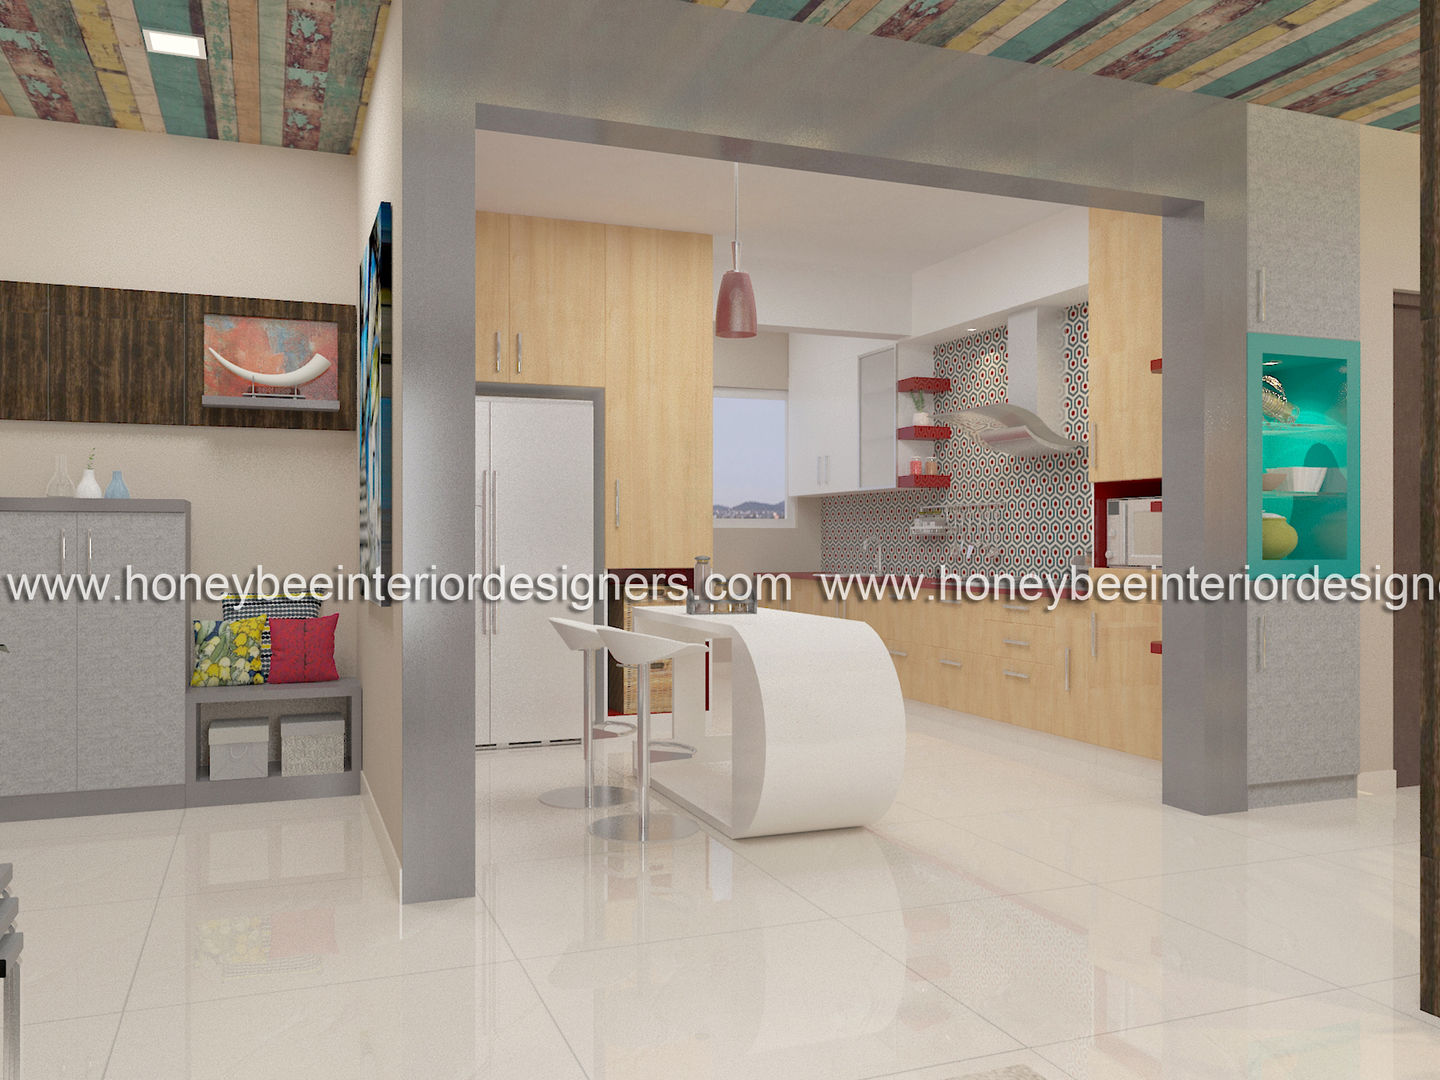 3 BHK Apartment for a young couple, Honeybee Interior Designers Honeybee Interior Designers وحدات مطبخ